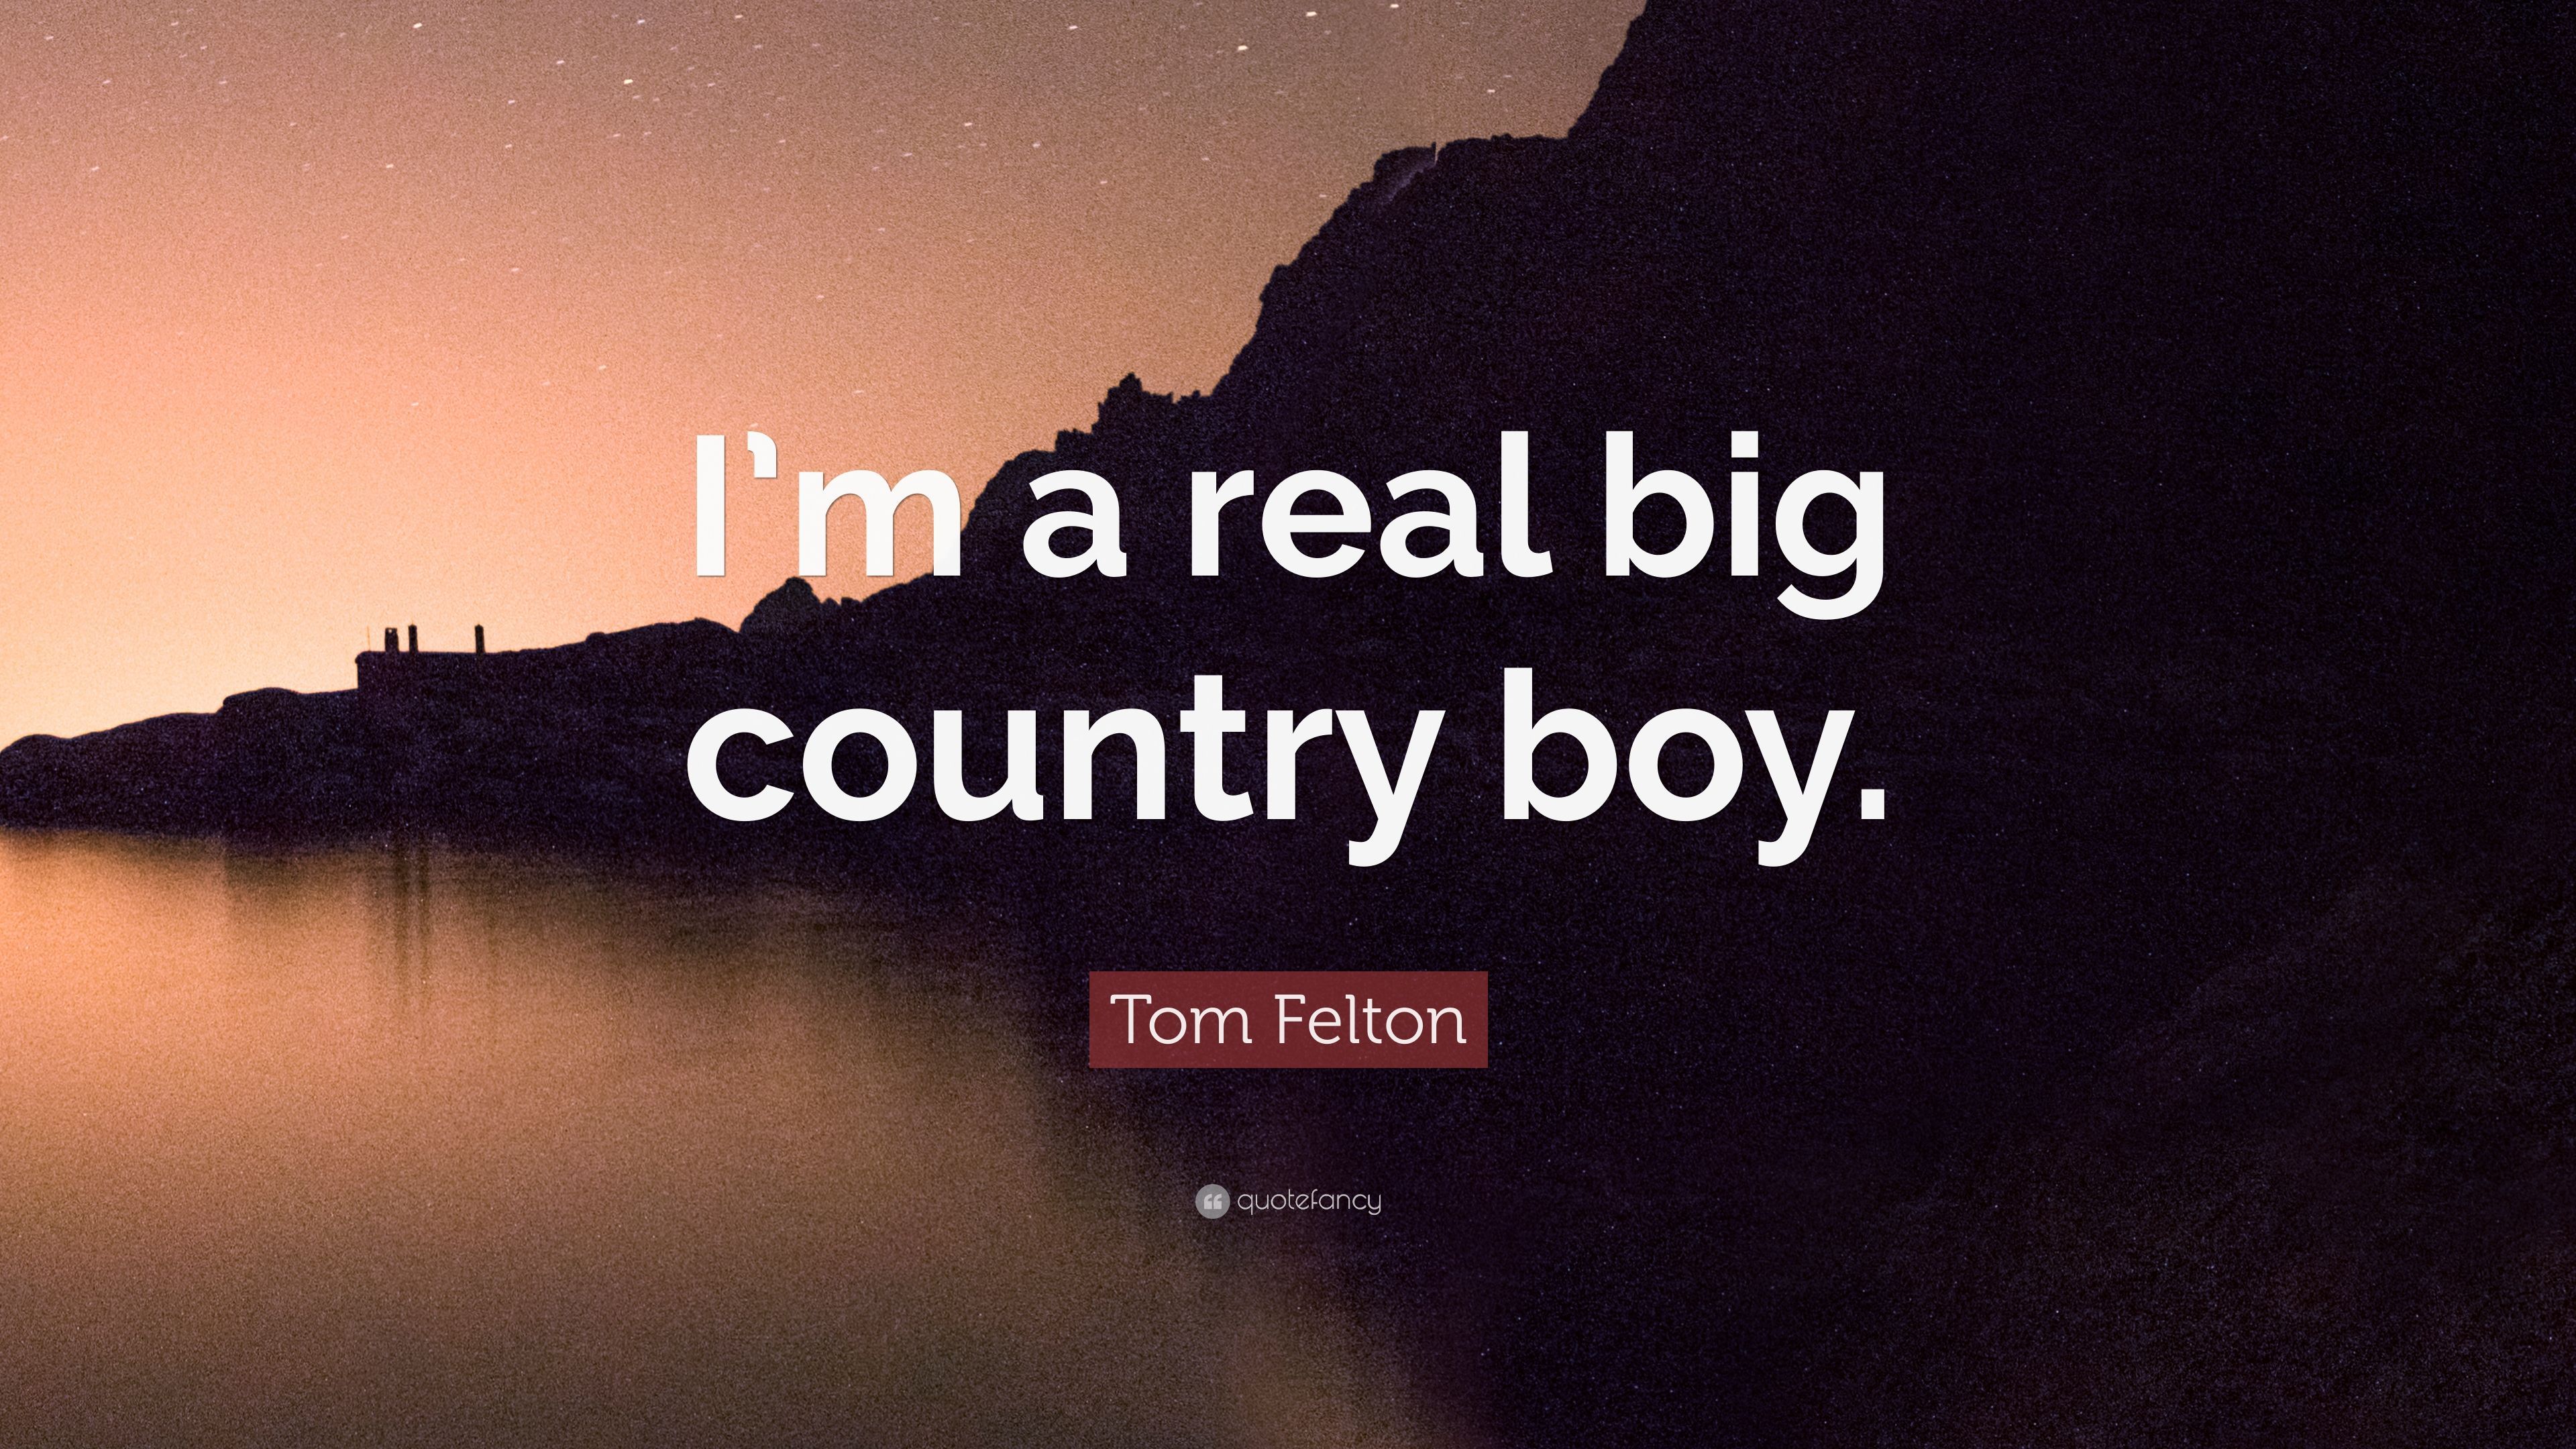 Tom Felton Quote: “I'm a real big country boy.” 7 wallpaper